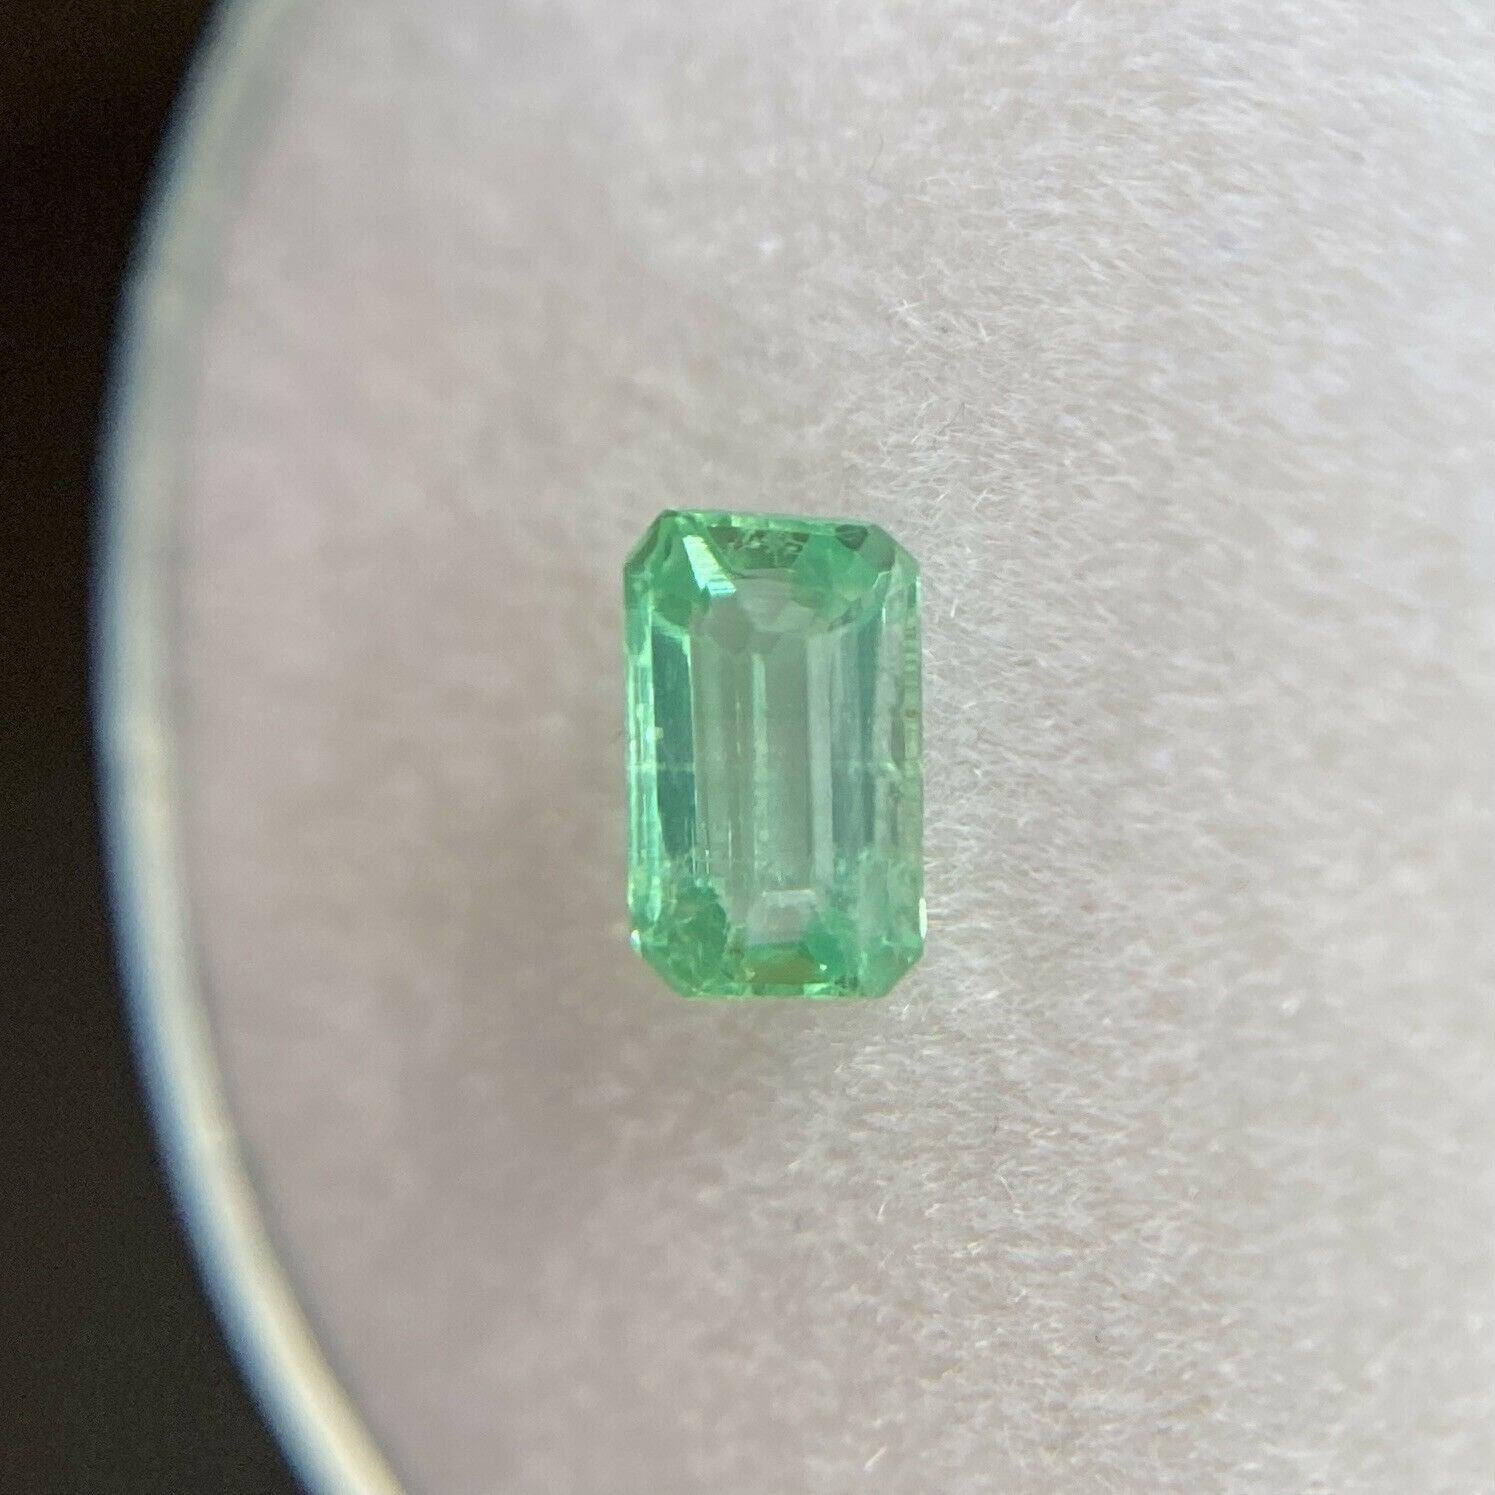 Fine Vivid Green Natural Emerald 0.35ct Rare Loose Emerald Octagon Cut Gemstone

Fine Natural Green Emerald Gemstone. 
Beautiful 0.35 carat emerald with a fine vivid green colour and excellent emerald/octagonal cut. 
The clarity on this stone is